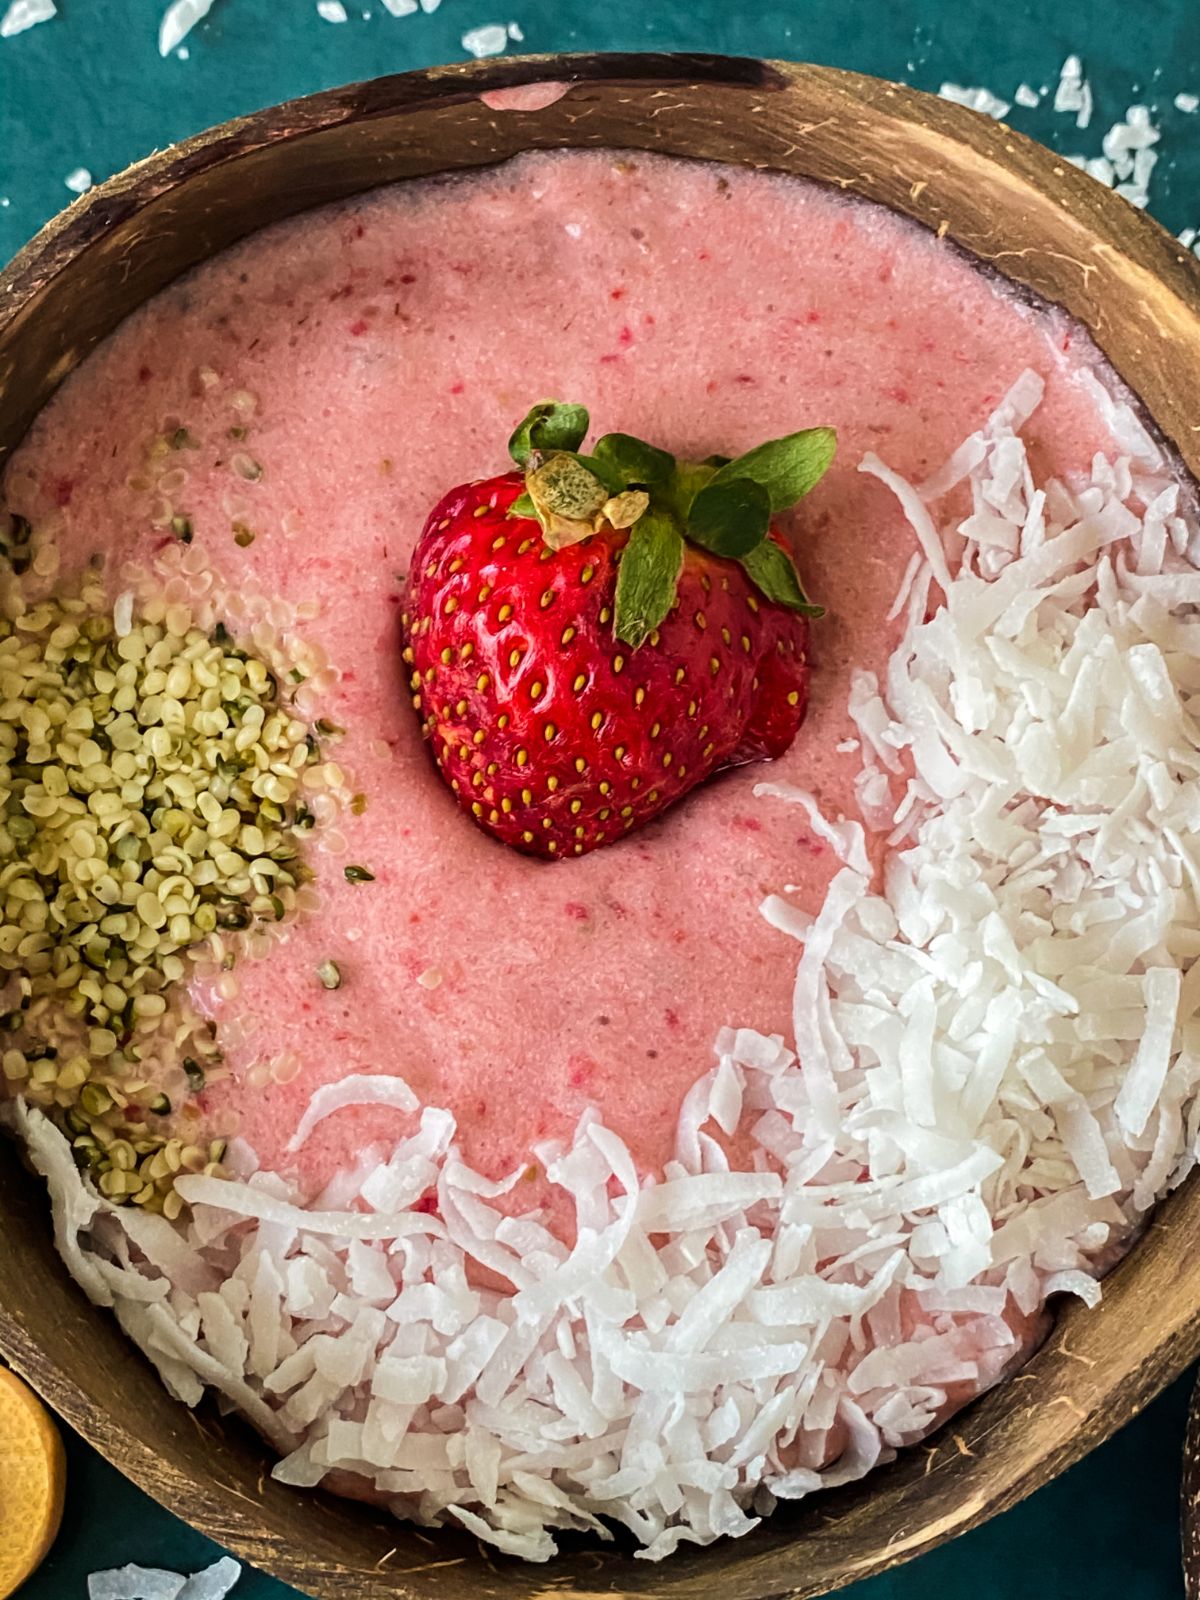 smoothie bowl topped with shredded coconut chia seeds and a whole strawberry